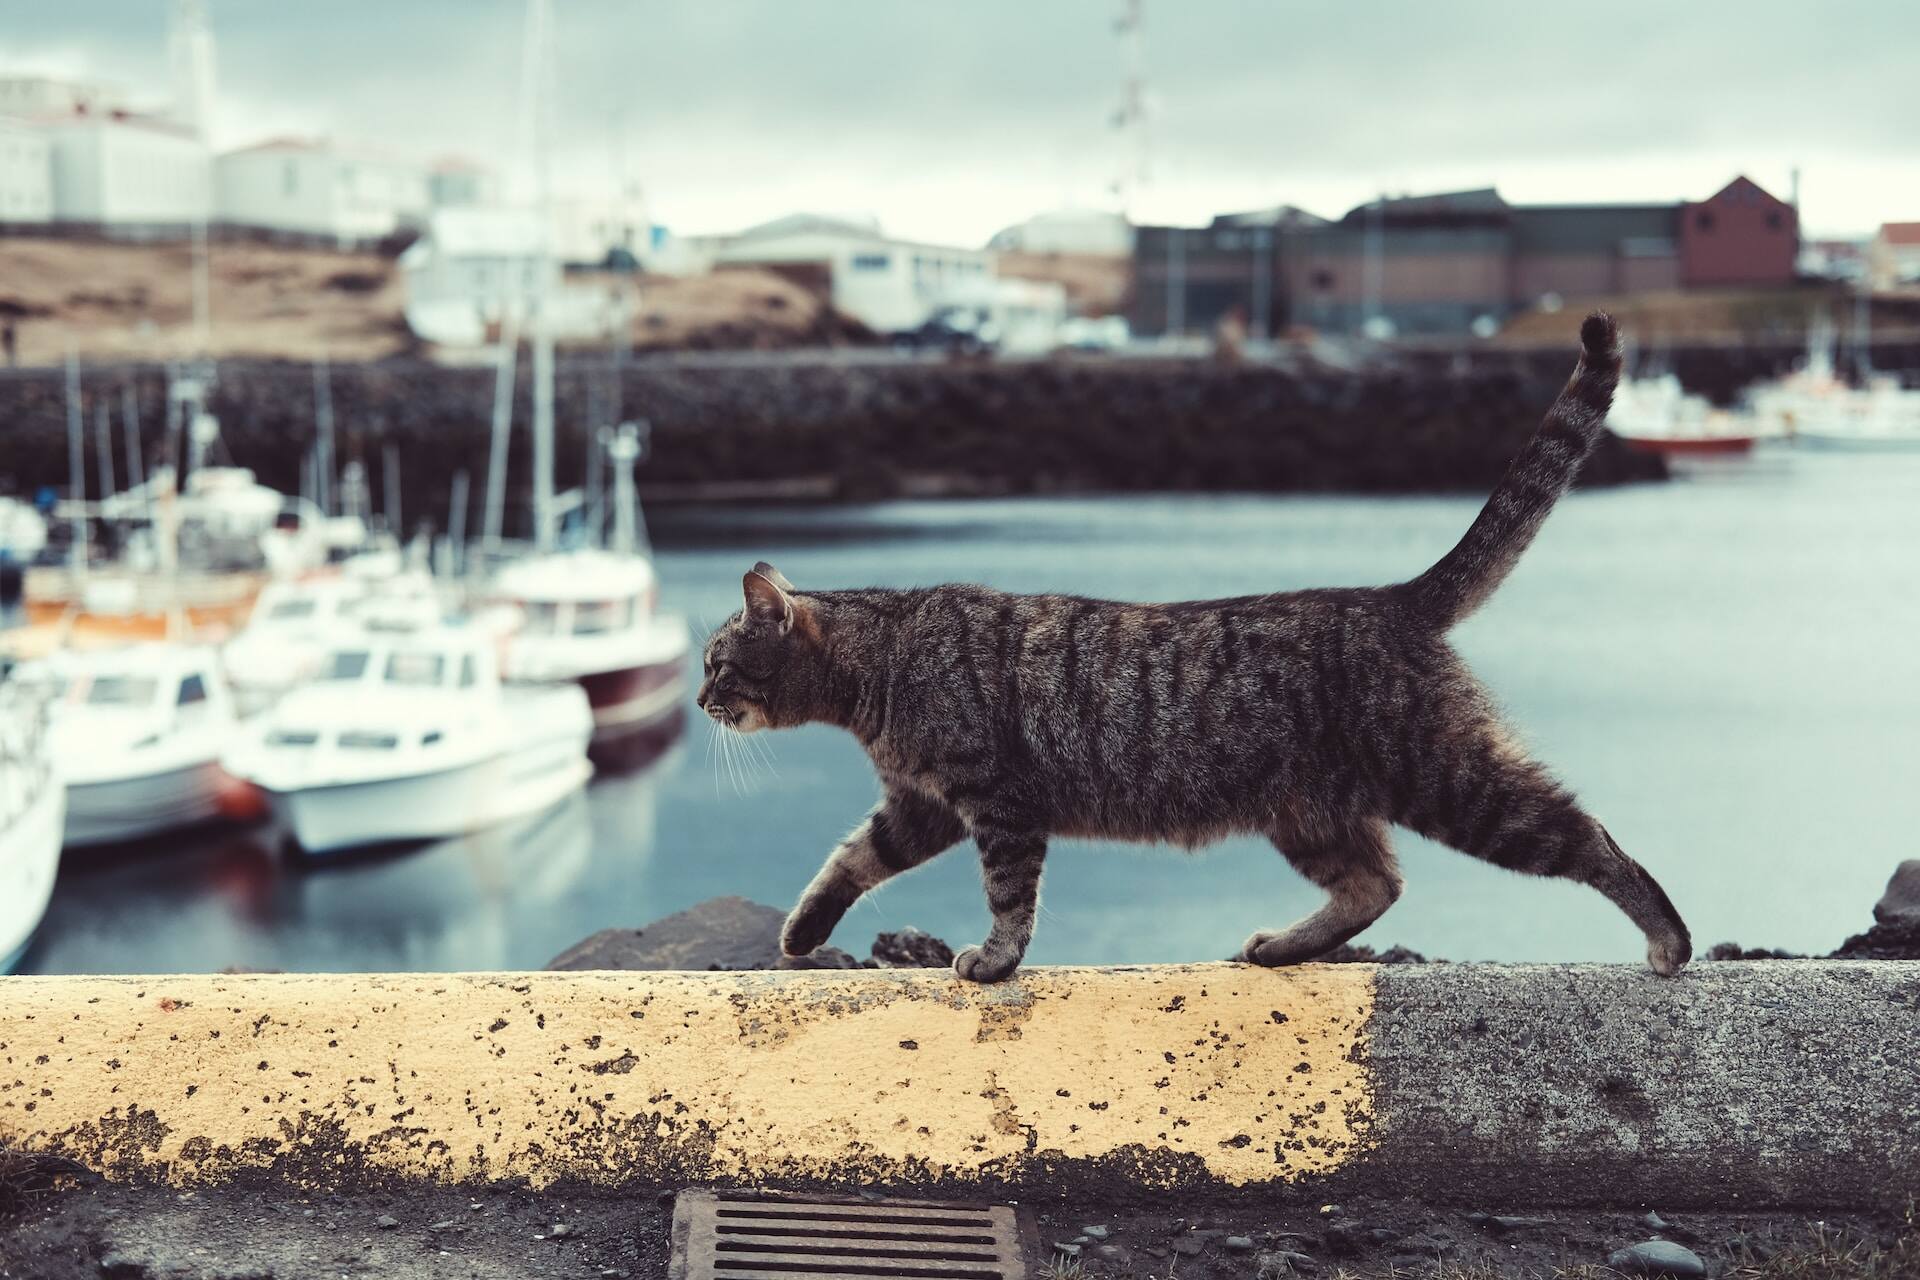 A cat walking on a ledge by a pier